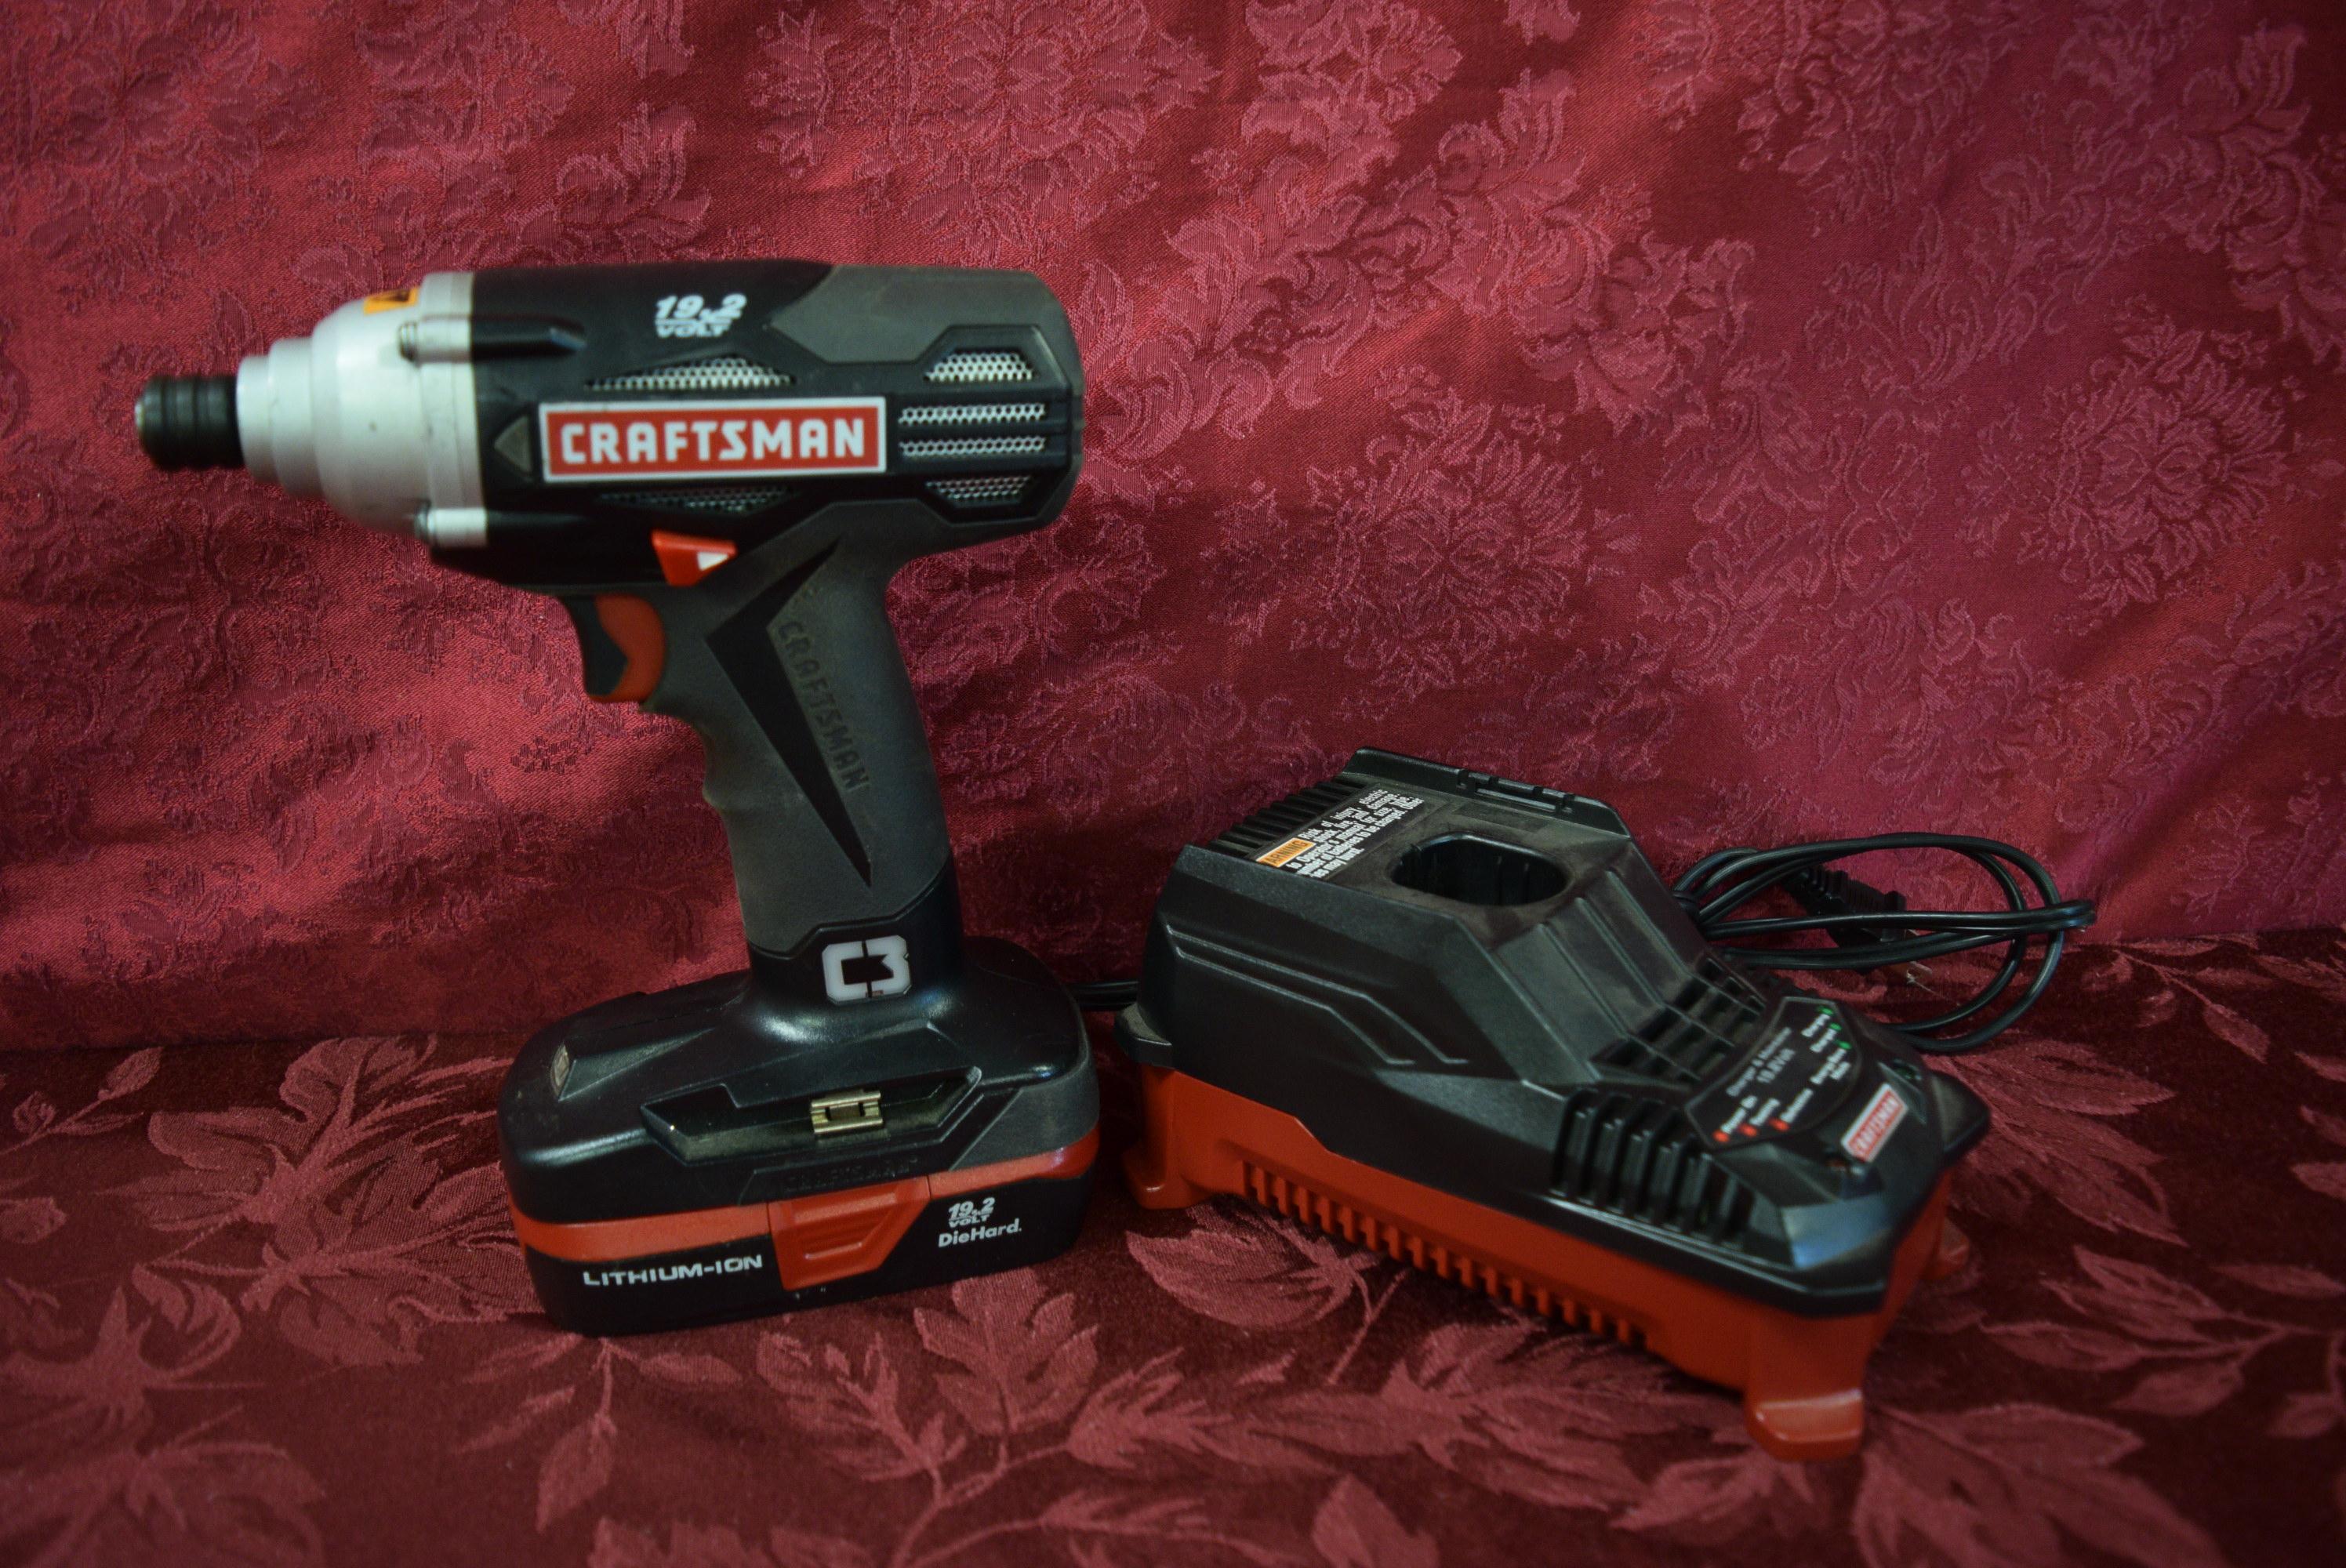 CRAFTSMAN CORDLESS DRILL WITH CHARGER!